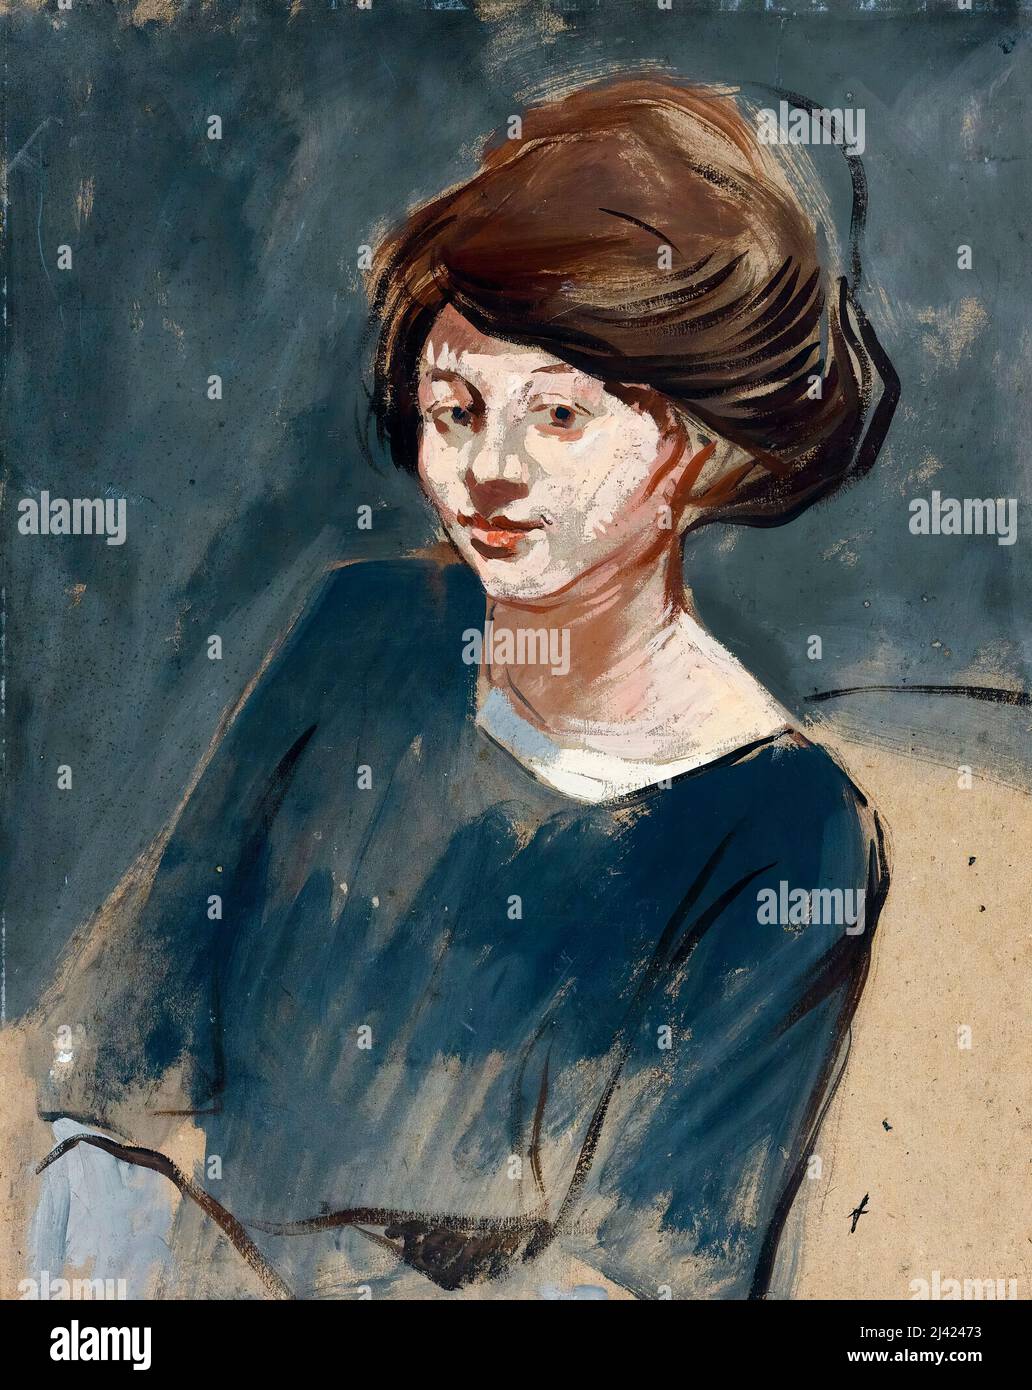 Jean-Louis Forain, Portrait Of A Woman, painting before 1931 Stock Photo